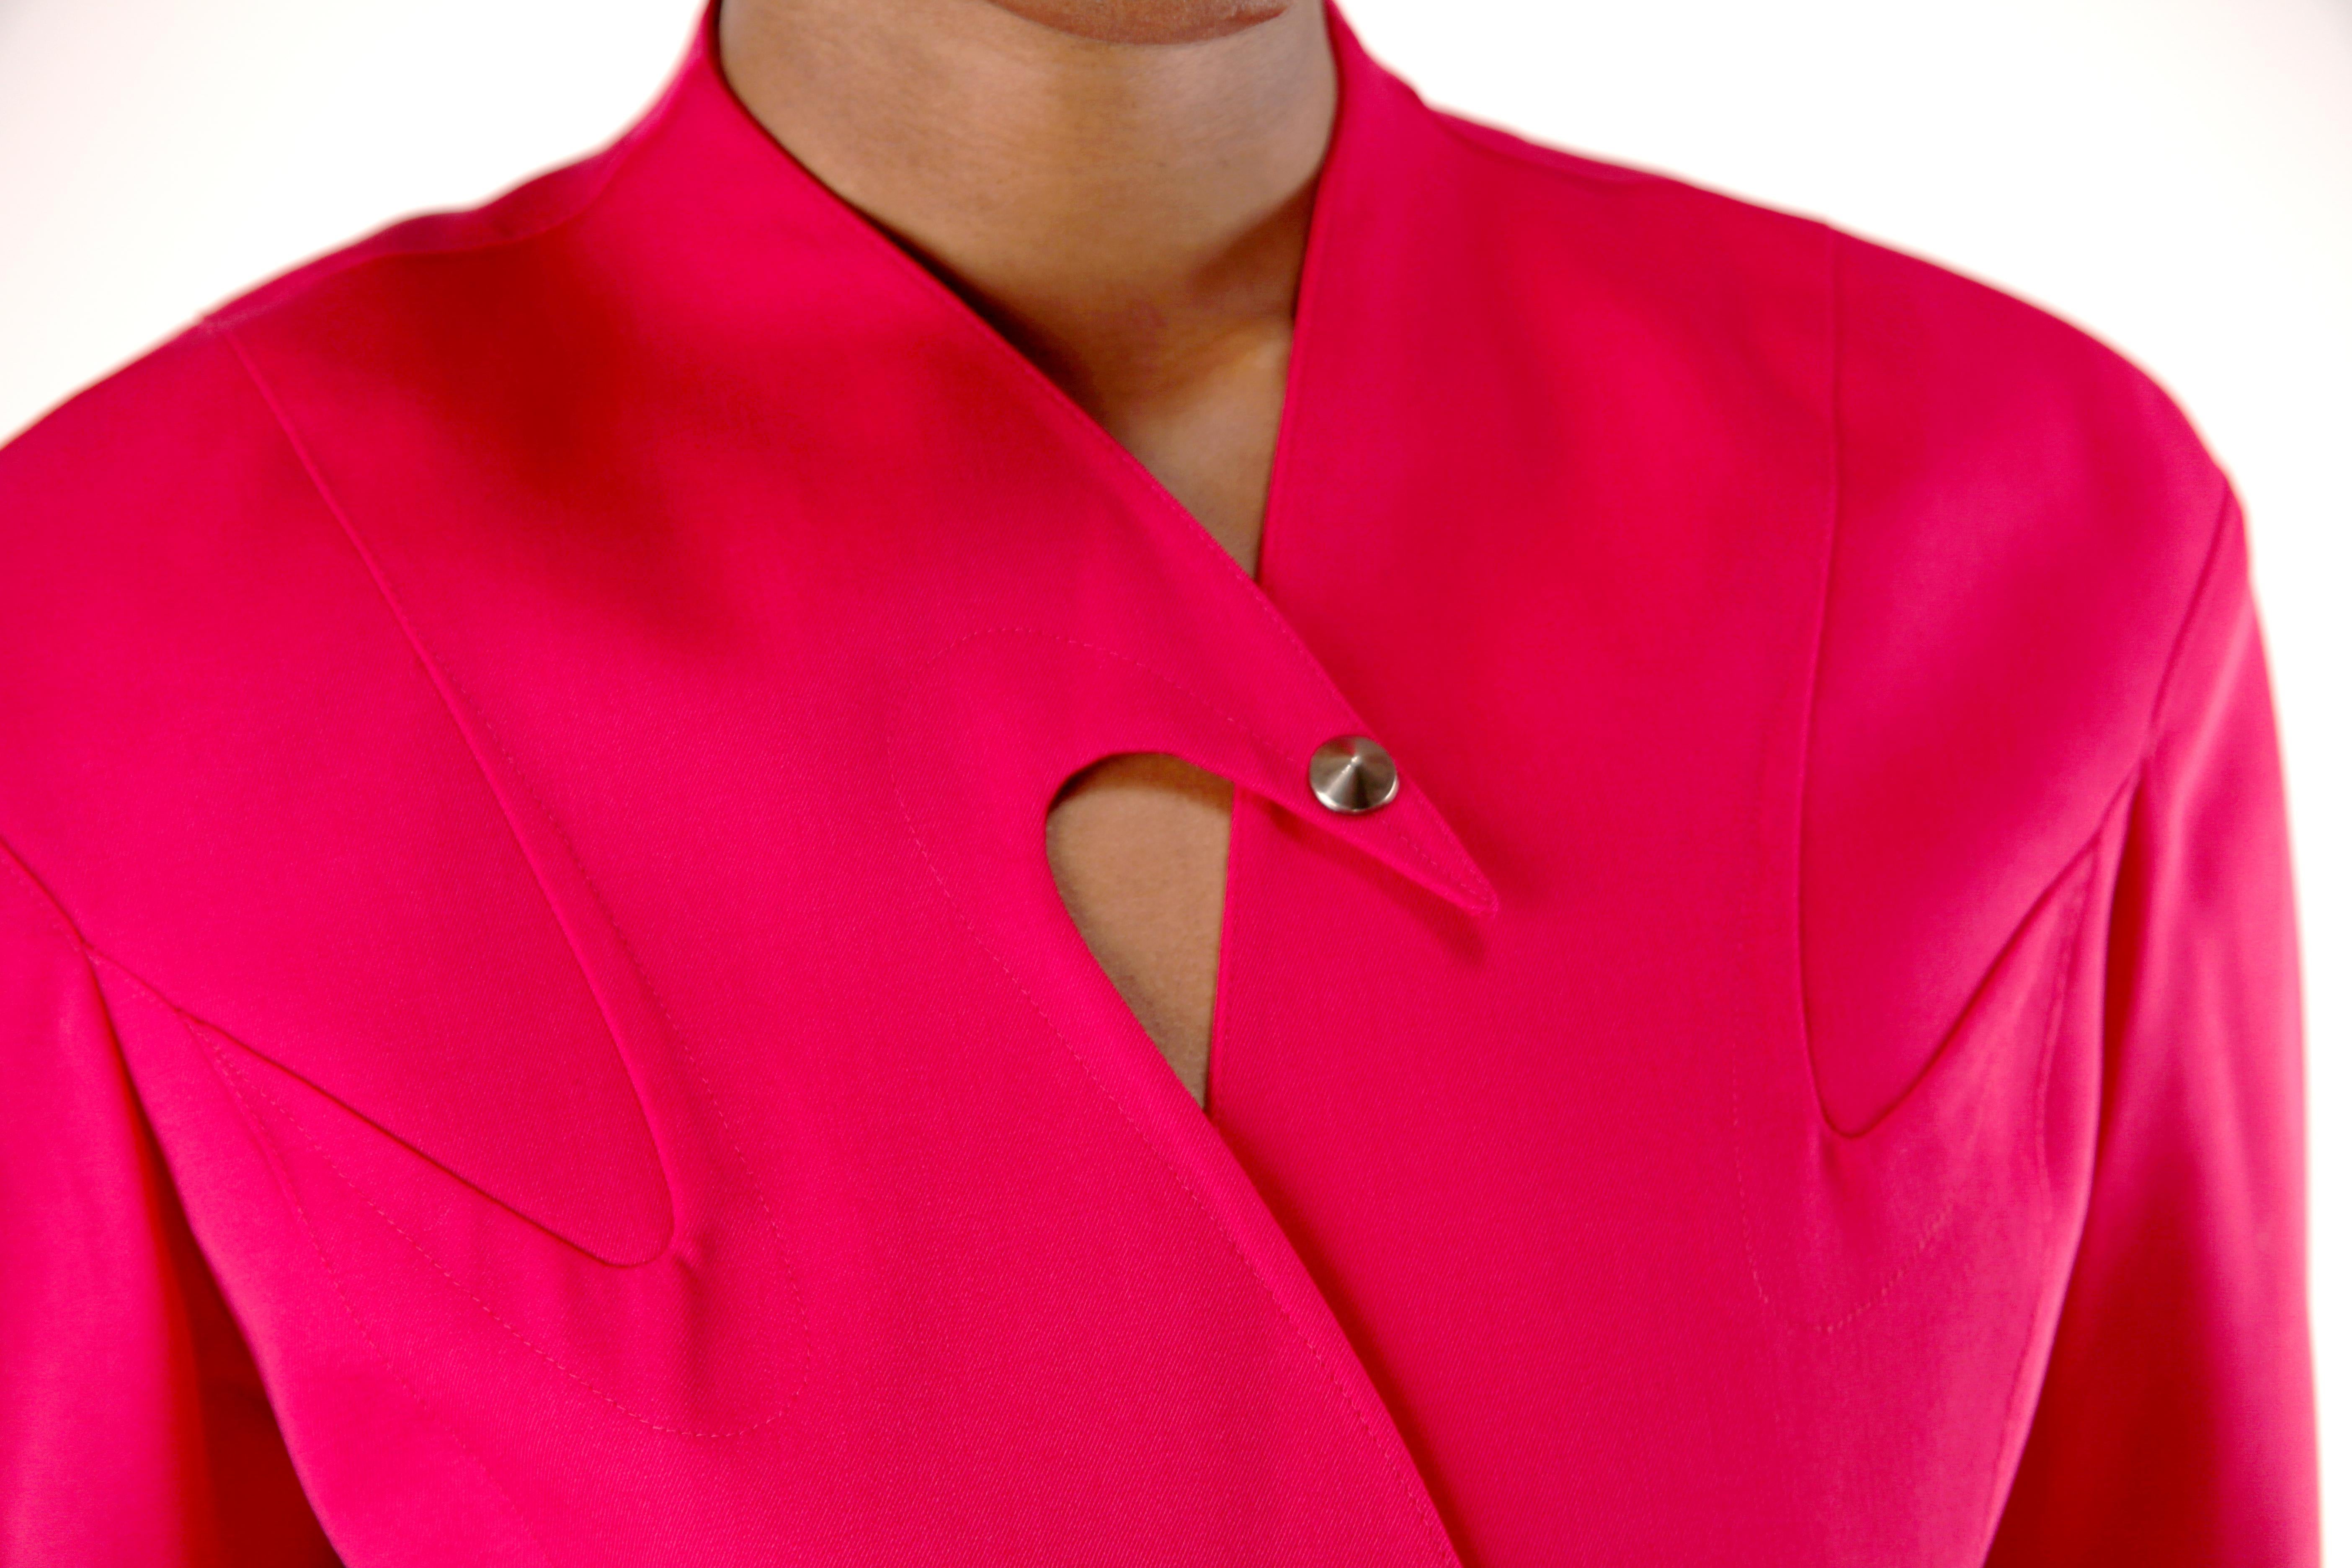 Women's Thierry Mugler collectable intense “red-pink” hourglass jacket, circa 1980s